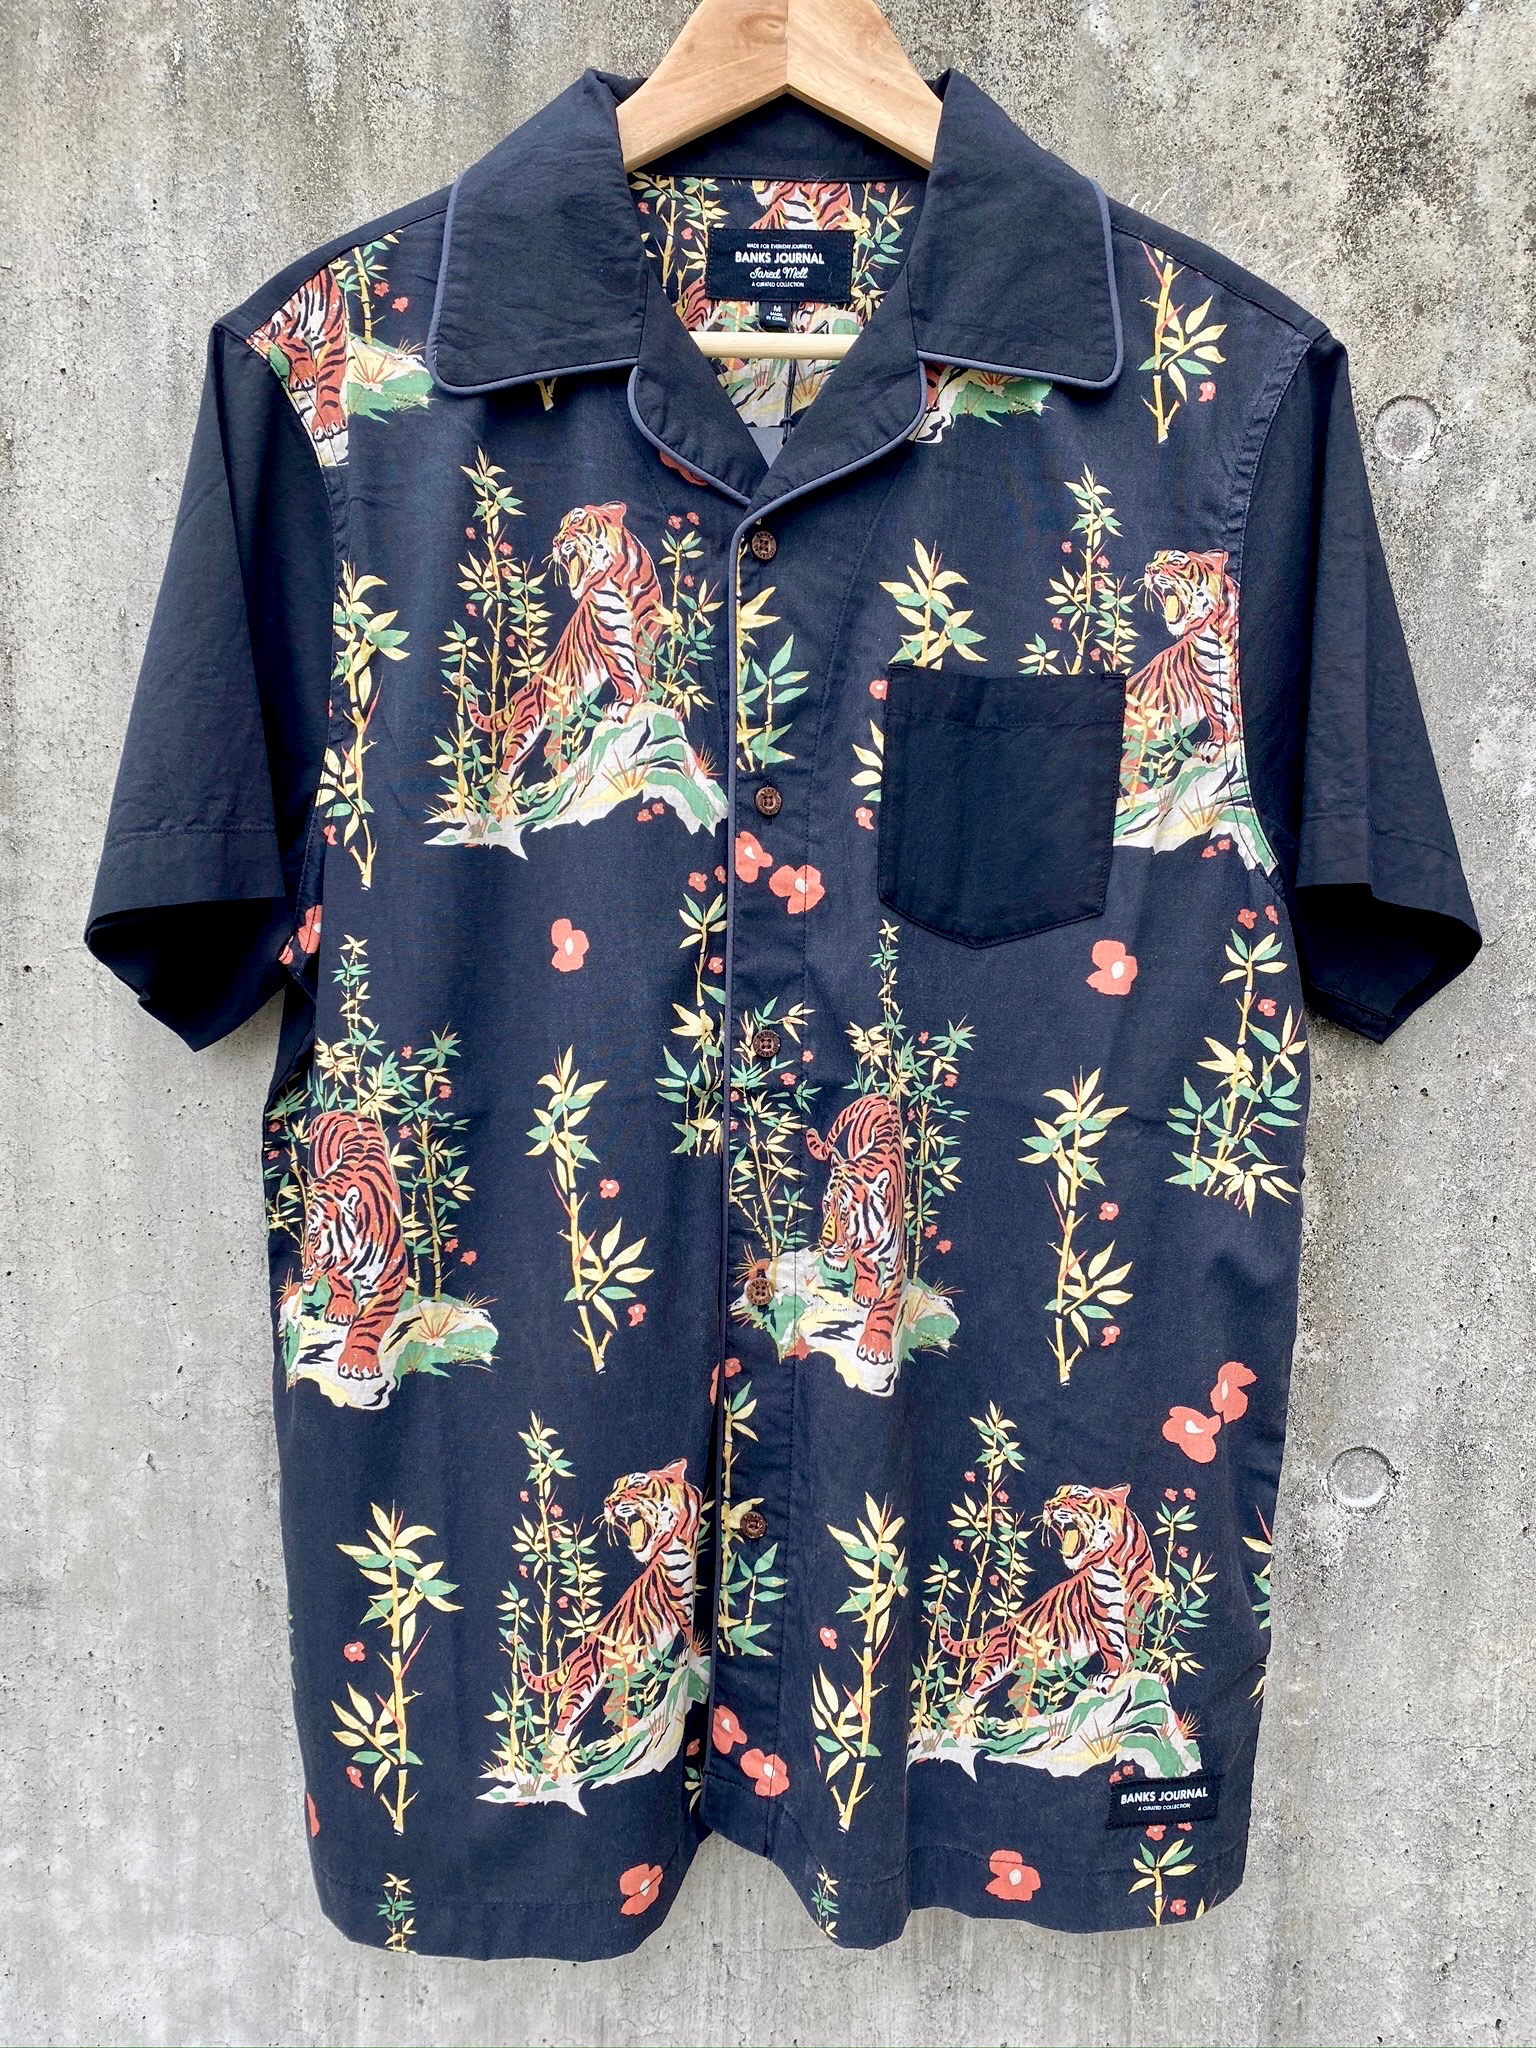 BANKS JOURNAL JARED MELL S/S WOVEN SHIRT|Okinawa surf shop YES SURF